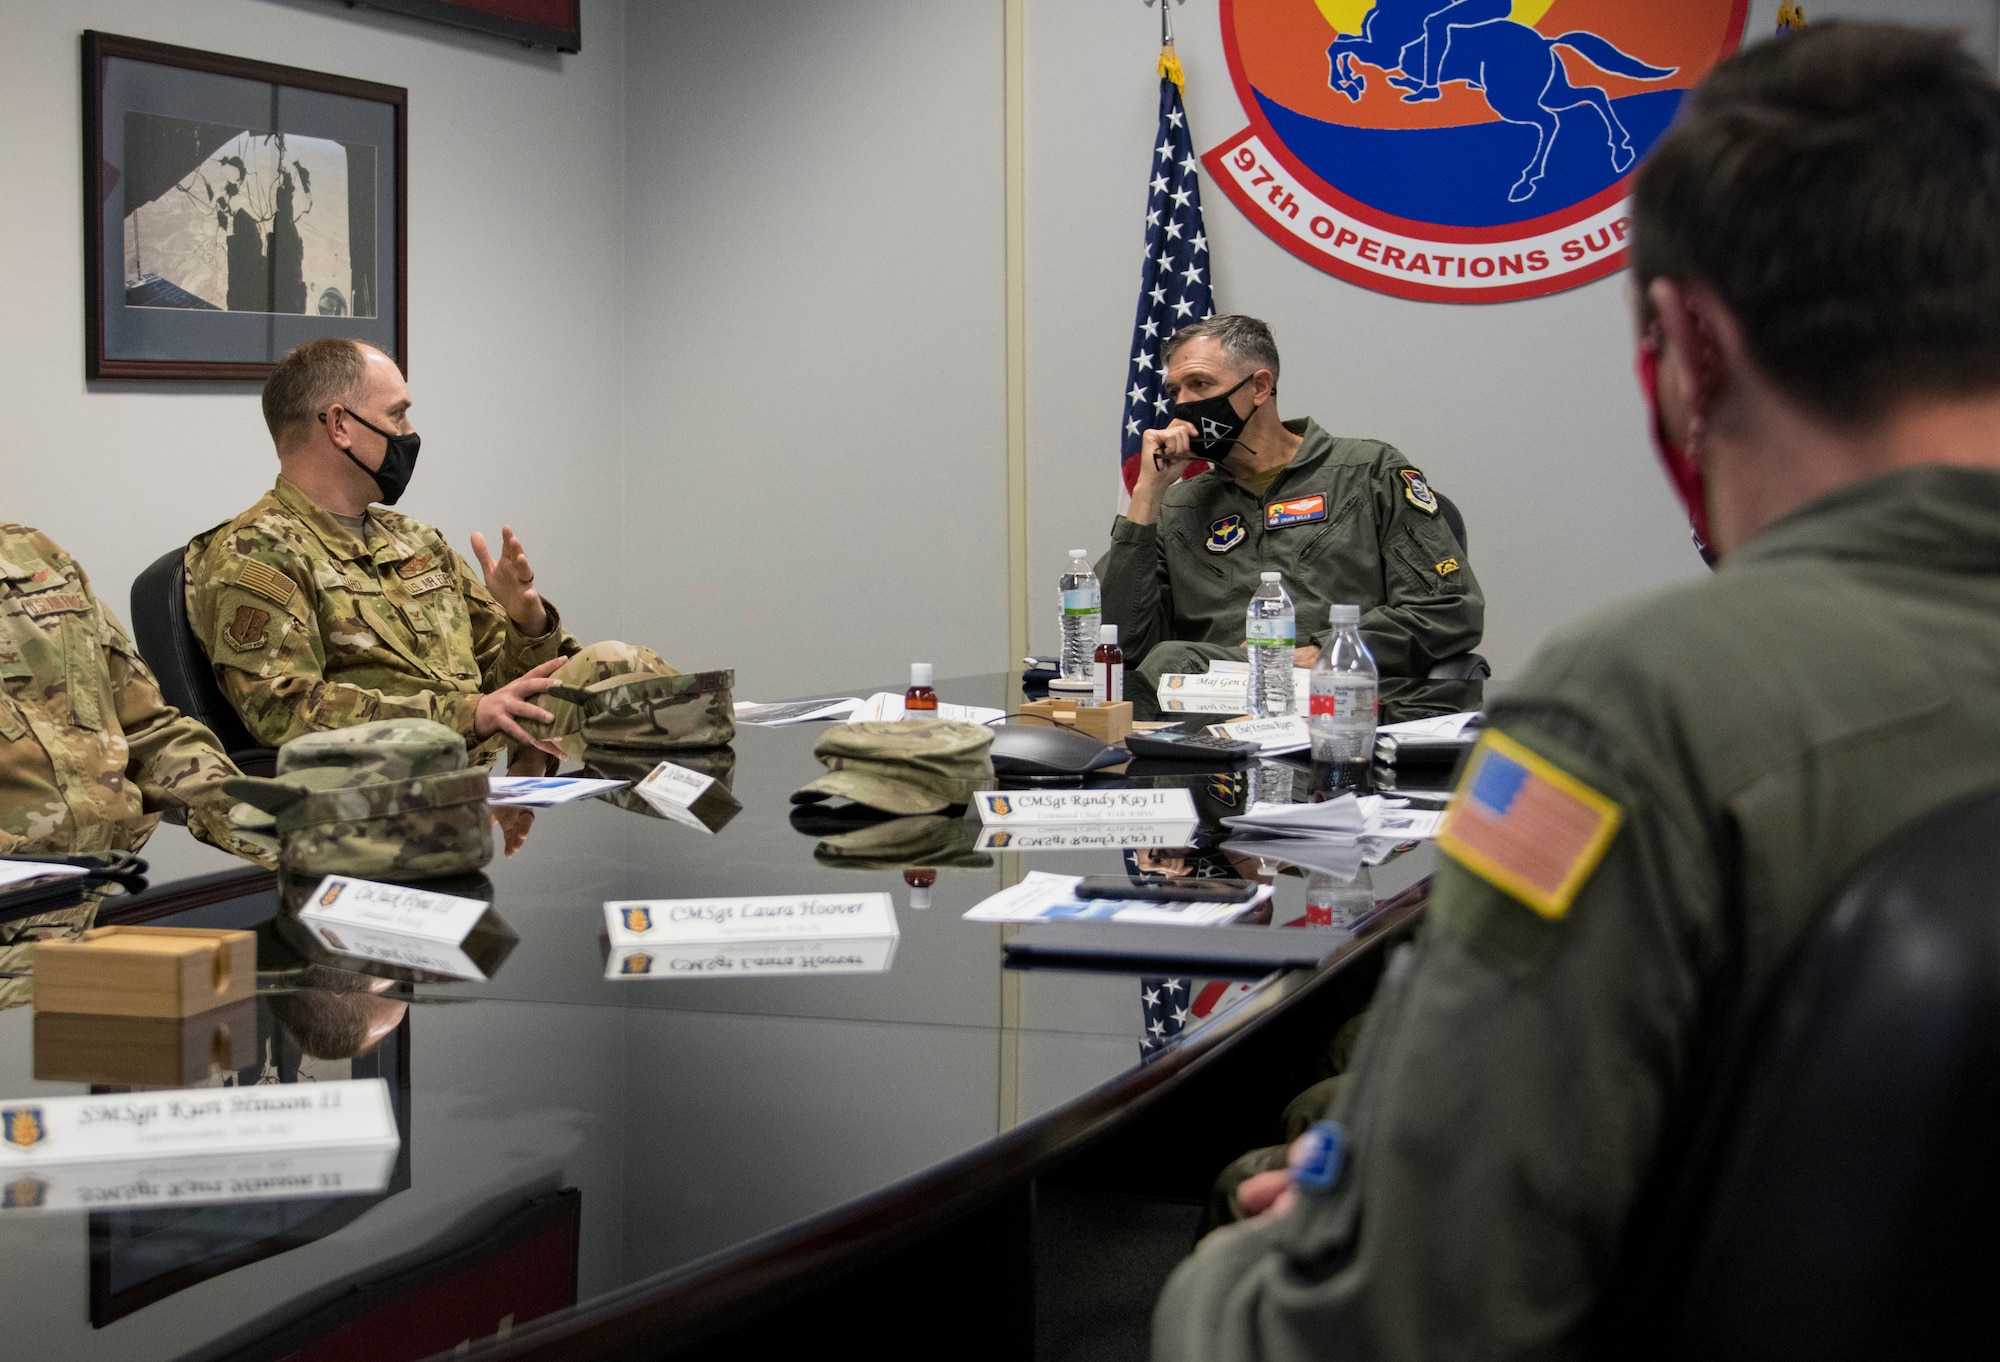 U.S. Air Force Col. Matthew Leard, 97th Air Mobility Wing (AMW) commander, speaks during a brief to Maj. Gen. Craig Wills, 19th Air Force commander, March 29, 2021, at Altus Air Force Base, Oklahoma. During Wills’ visit to the 97 AMW, he received multiple briefings explaining the updates and changes being made across the wing. (U.S. Air Force photo by Airman 1st Class Amanda Lovelace)